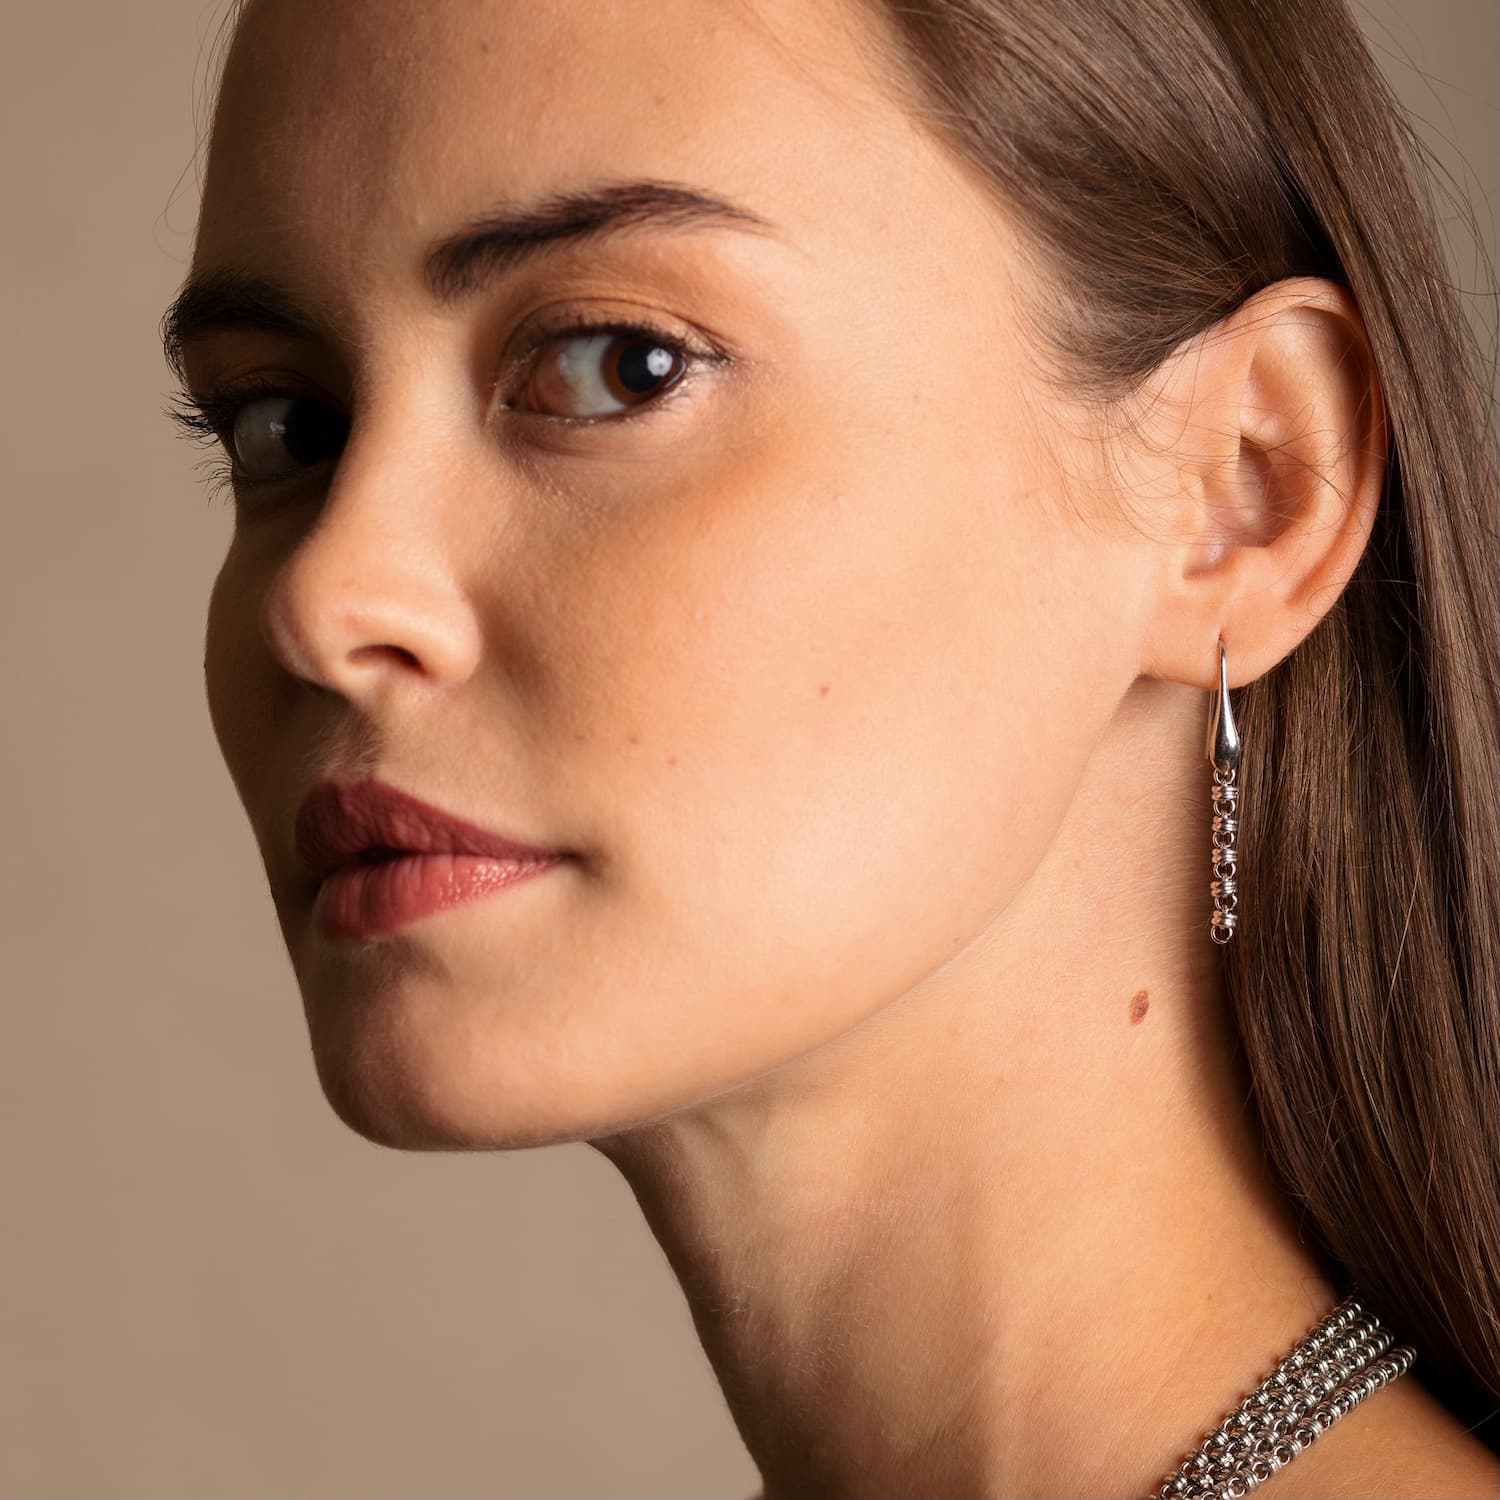 A model wearing long silver chain earrings designed and hand-crafted by DelBrenna Italian Jewelers in Tuscany. The earrings are designed based on the iconic Links collection of DelBrenna silver chains, necklaces, rings, and bracelets.